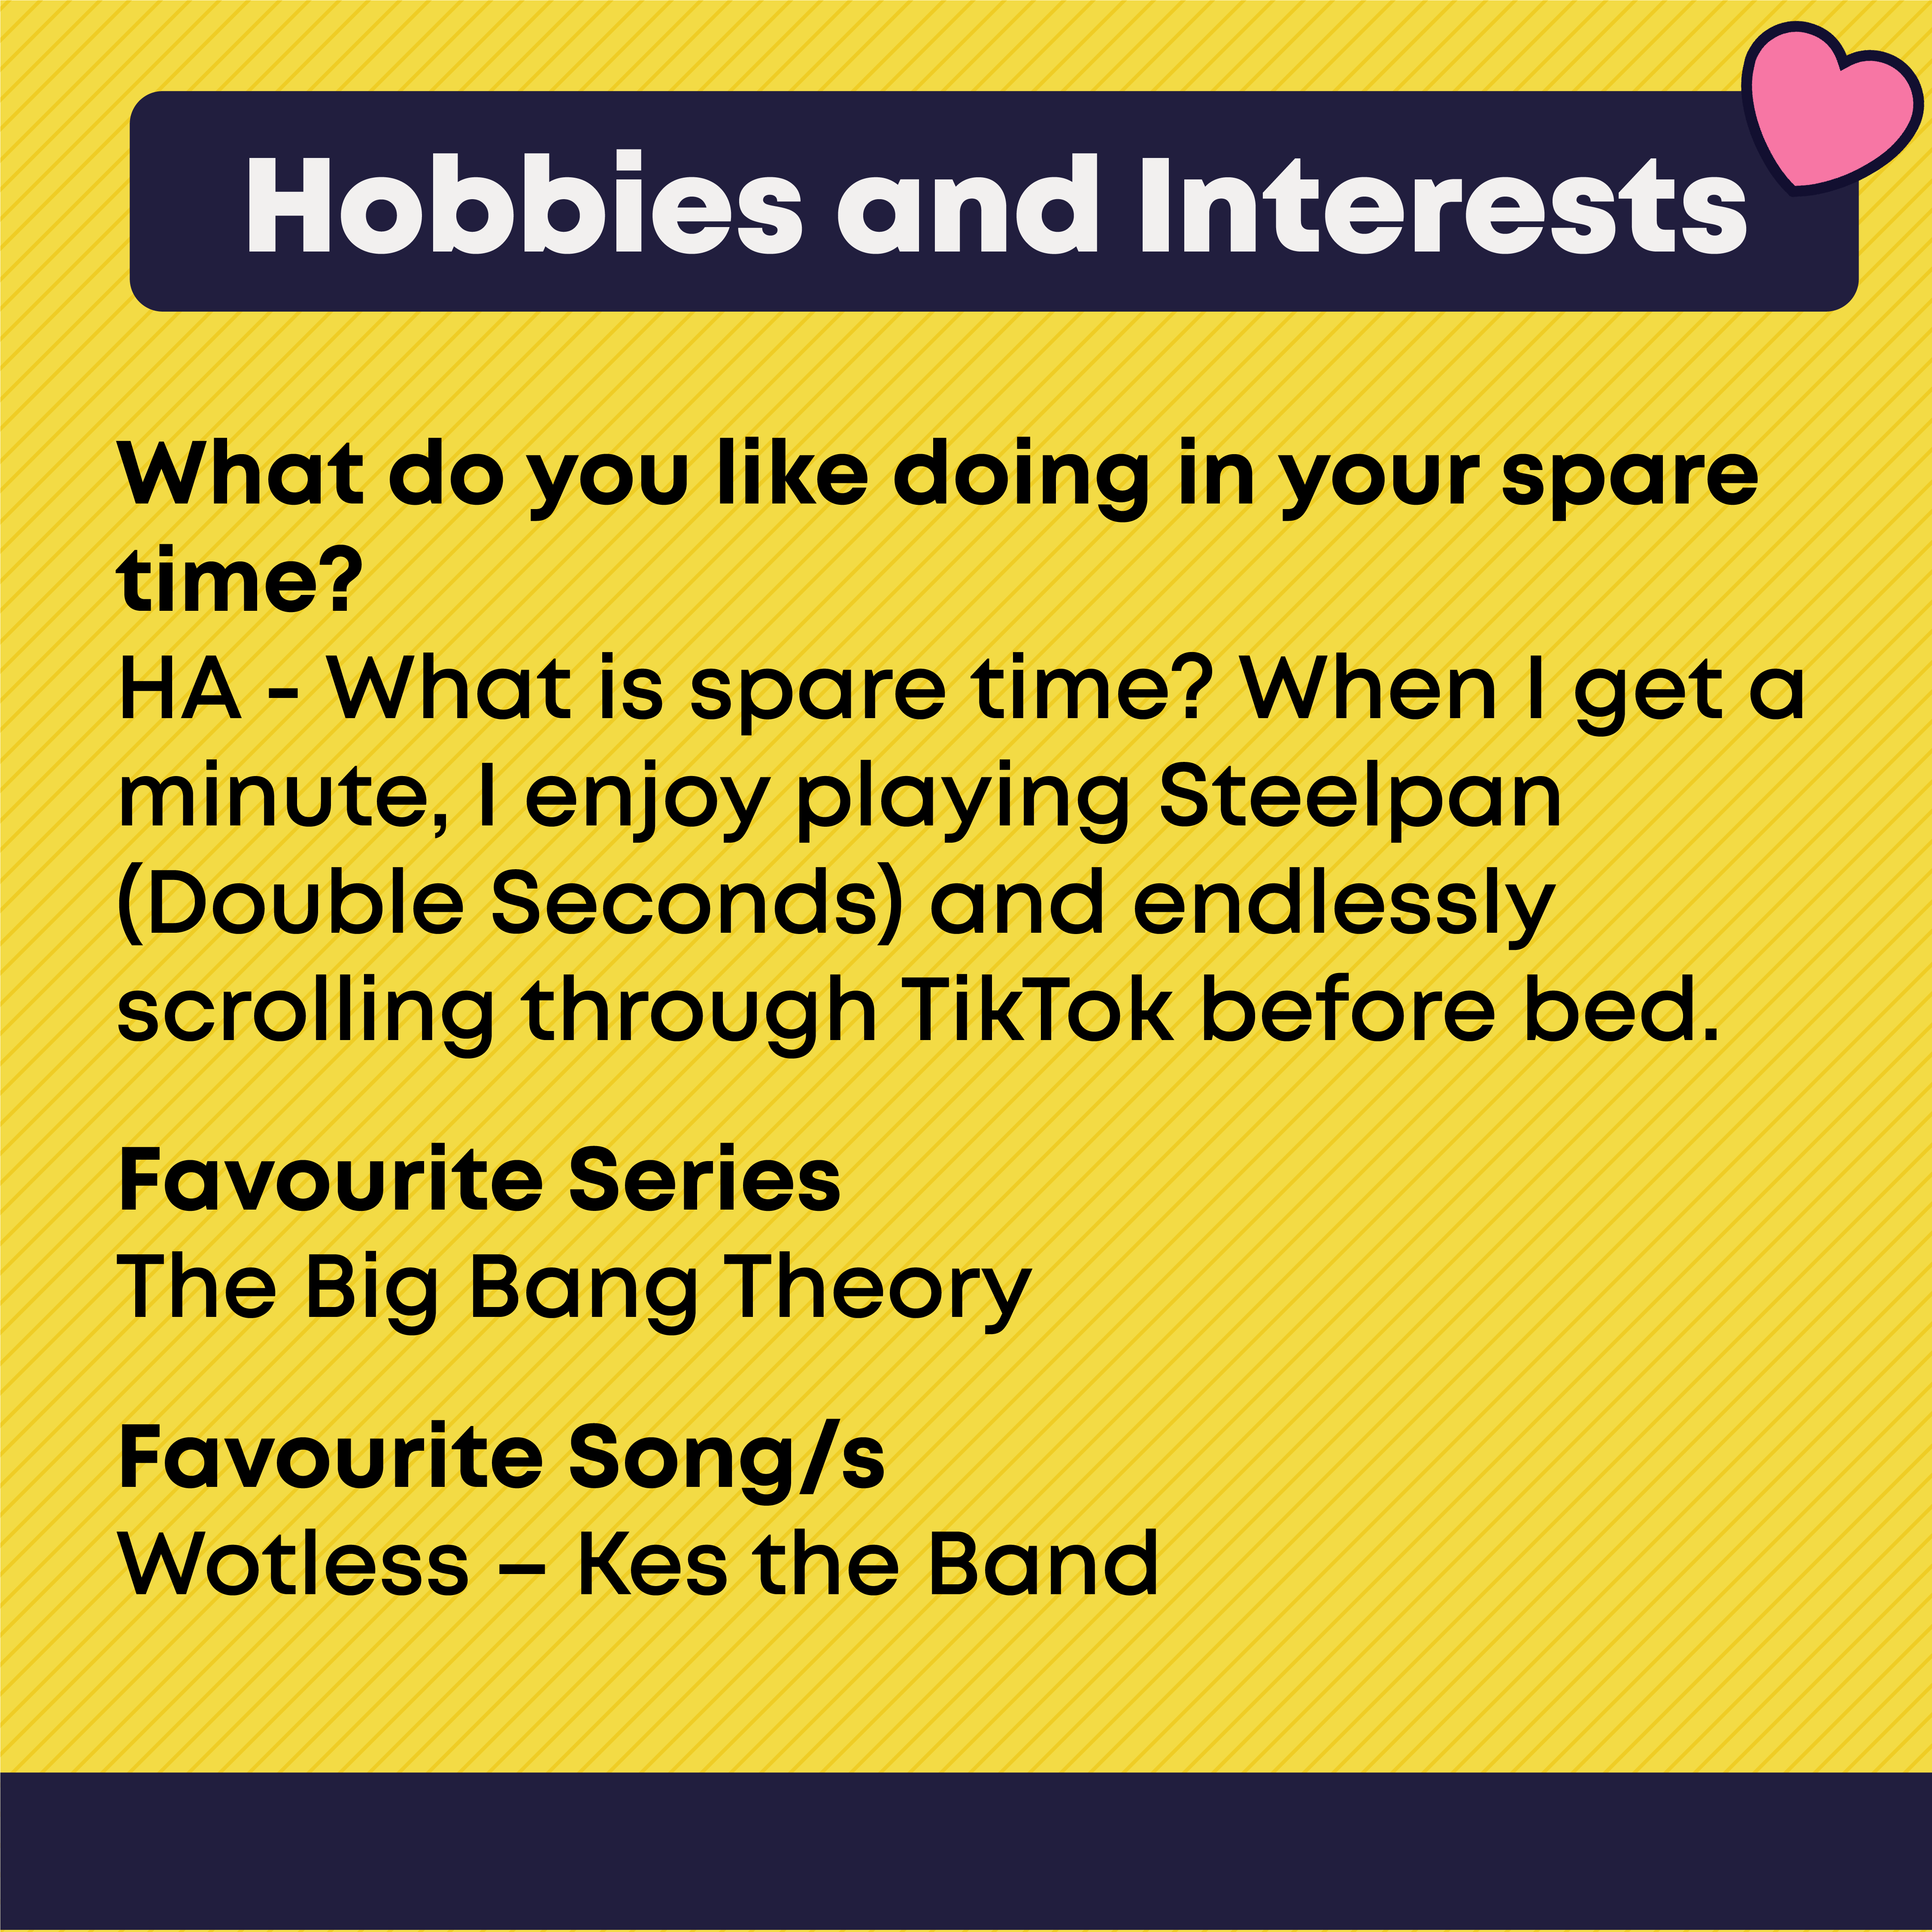 Hobbies and Interests. What you like doing in your spare time? HA - What is spare time? When I get a minute, I enjoy playing Steelpan (Double Seconds) and endlessly scrolling through TikTok before bed.  Favourite Series? The Big Bang Theory. Favourite Song/s?  Wotless – Kes the Band